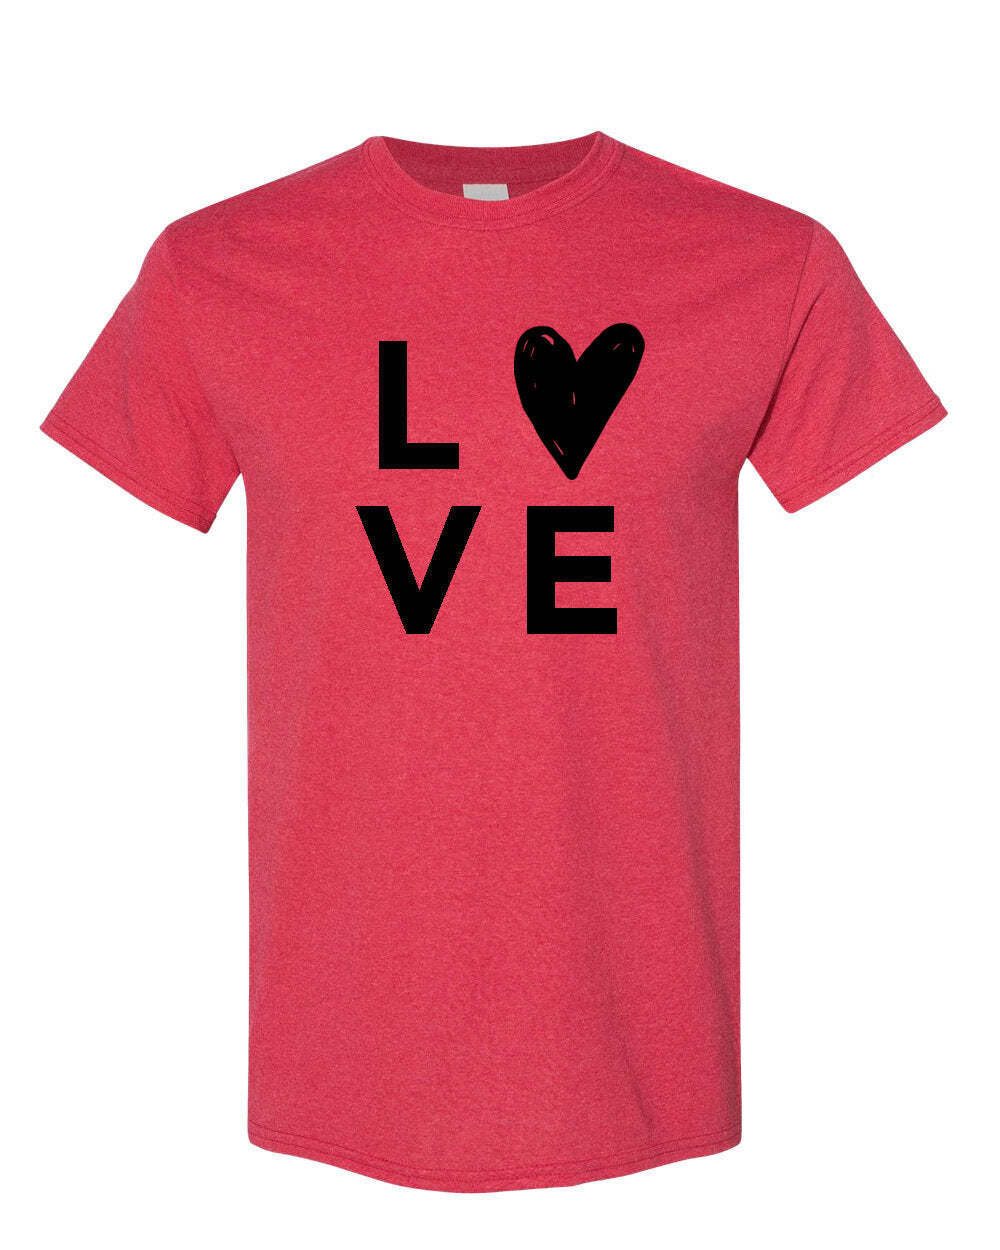 Love Shirt Red (Adult & Youth Unisex Sizes)